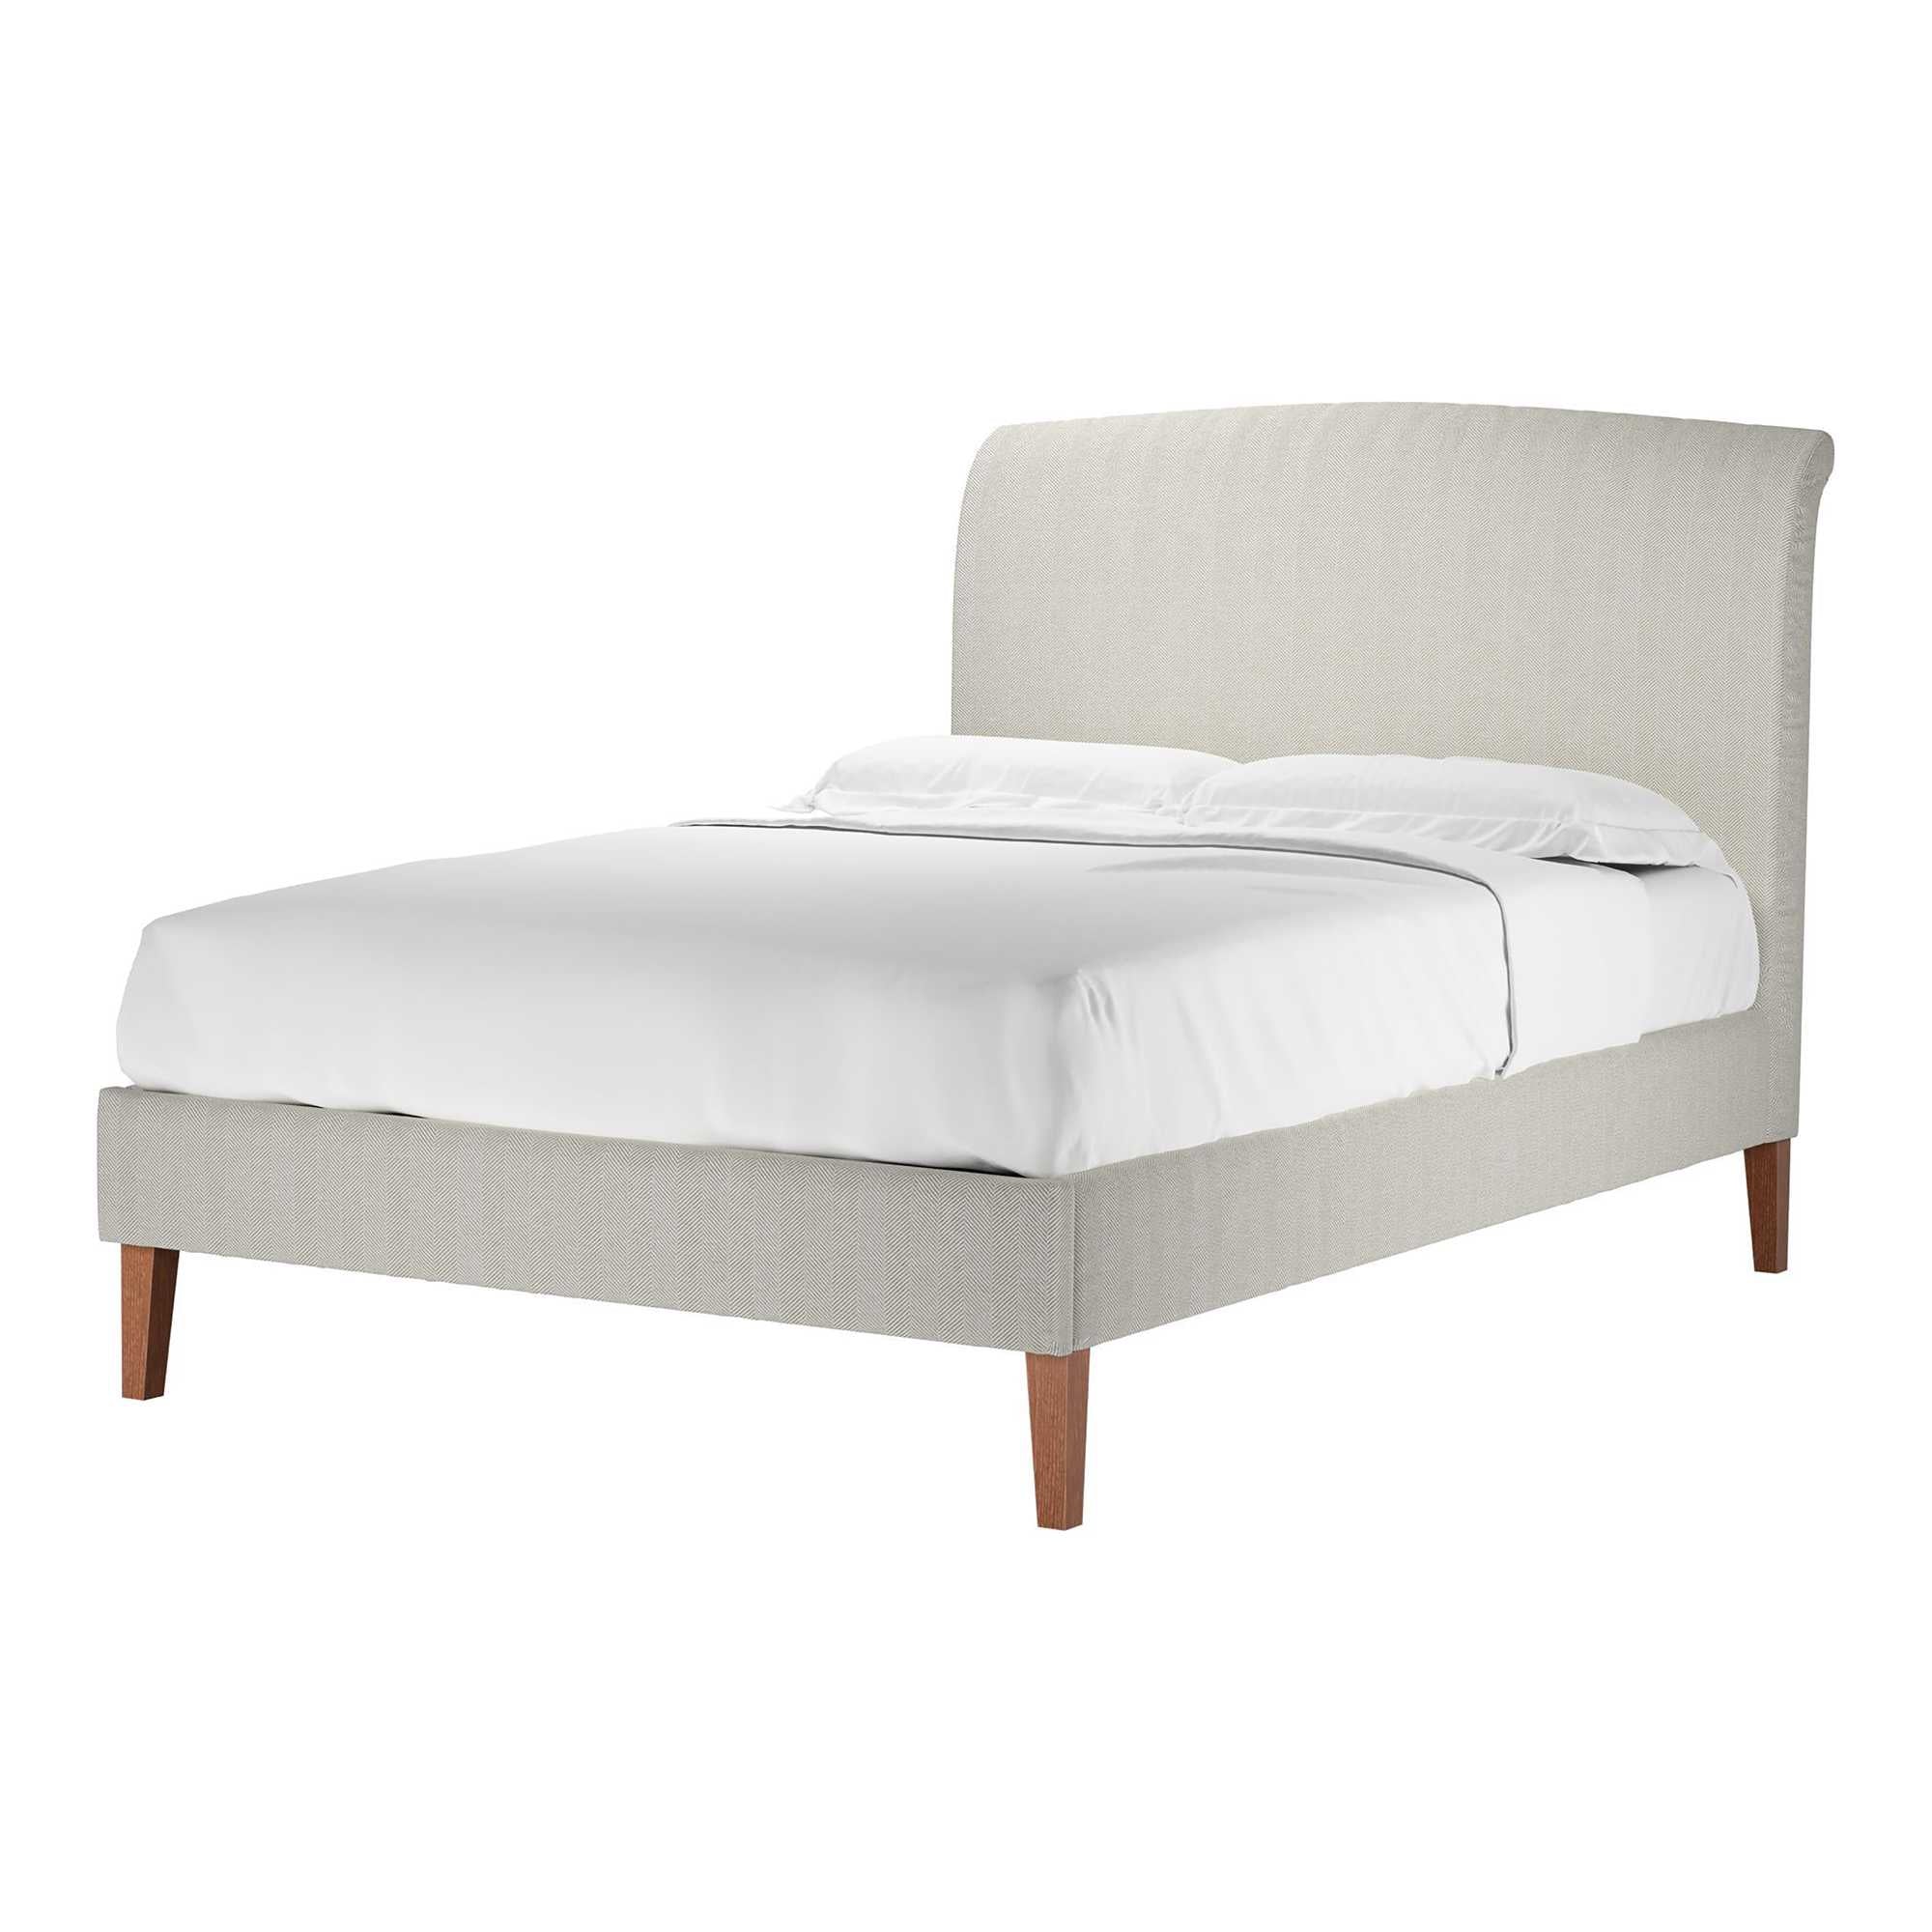 Thea Clay House Herringbone Weave Bed - Double Size